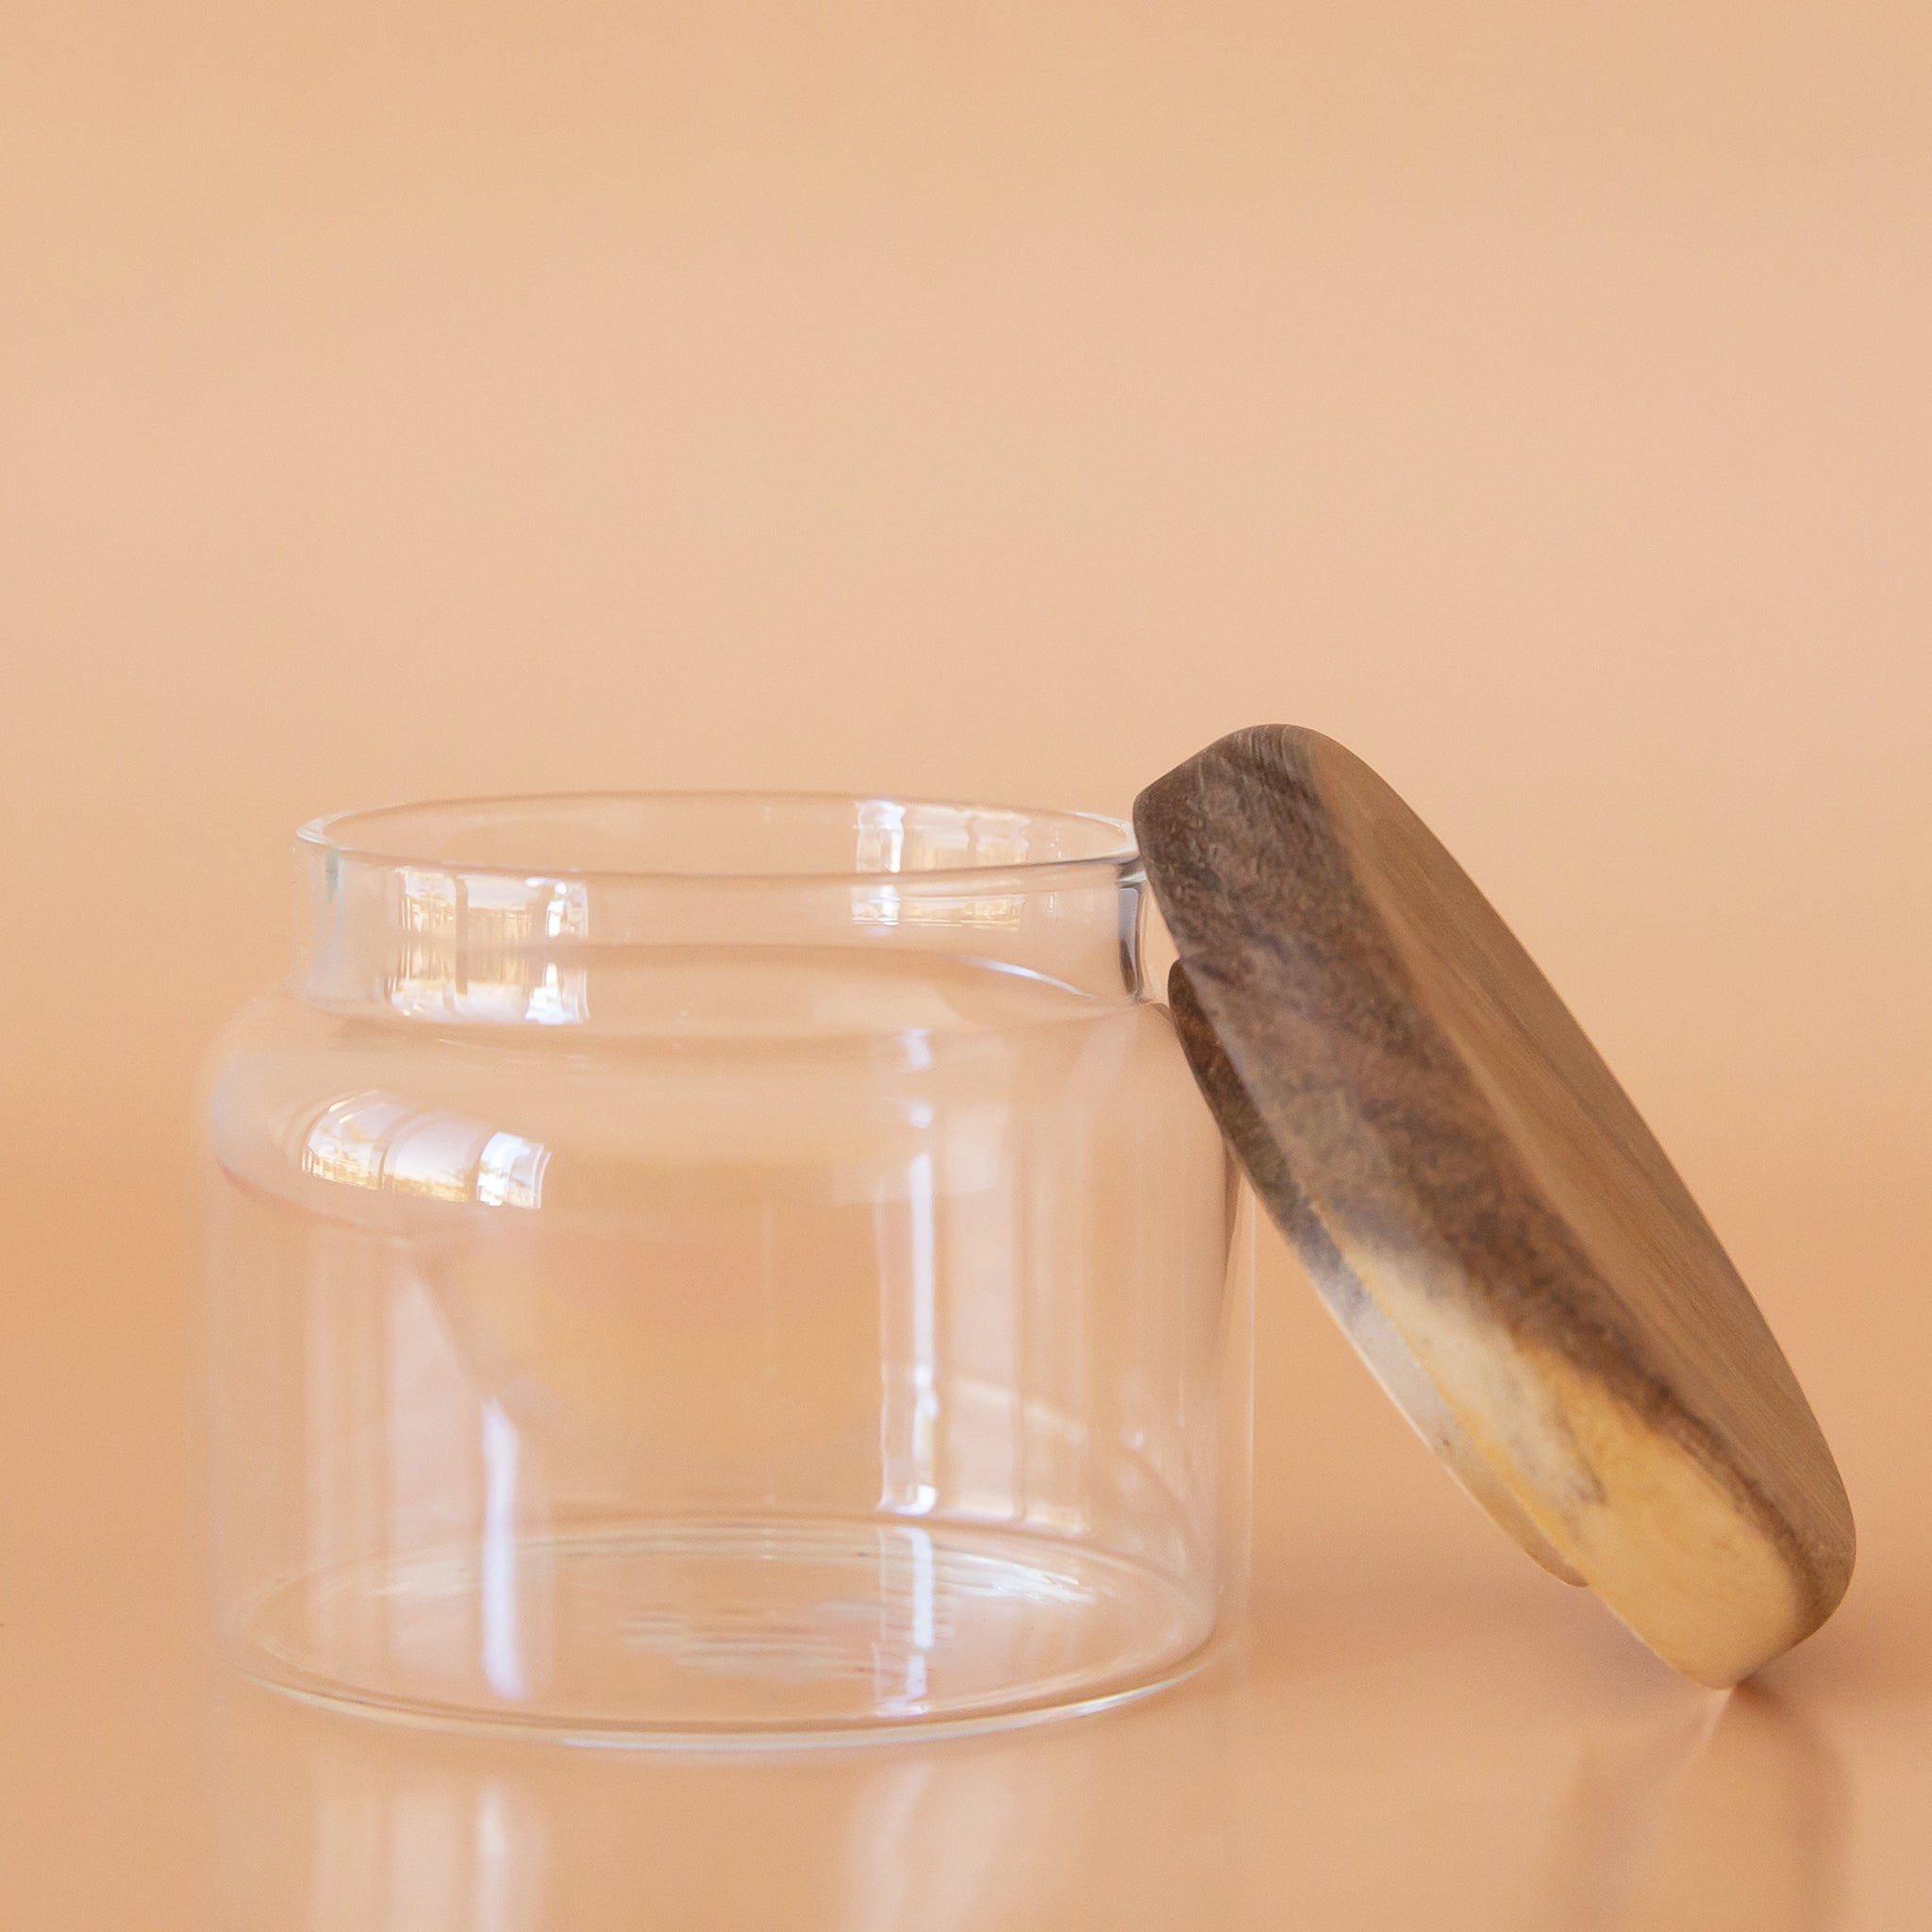 On a peach background is a clear glass storage canister with an acacia wood lid.